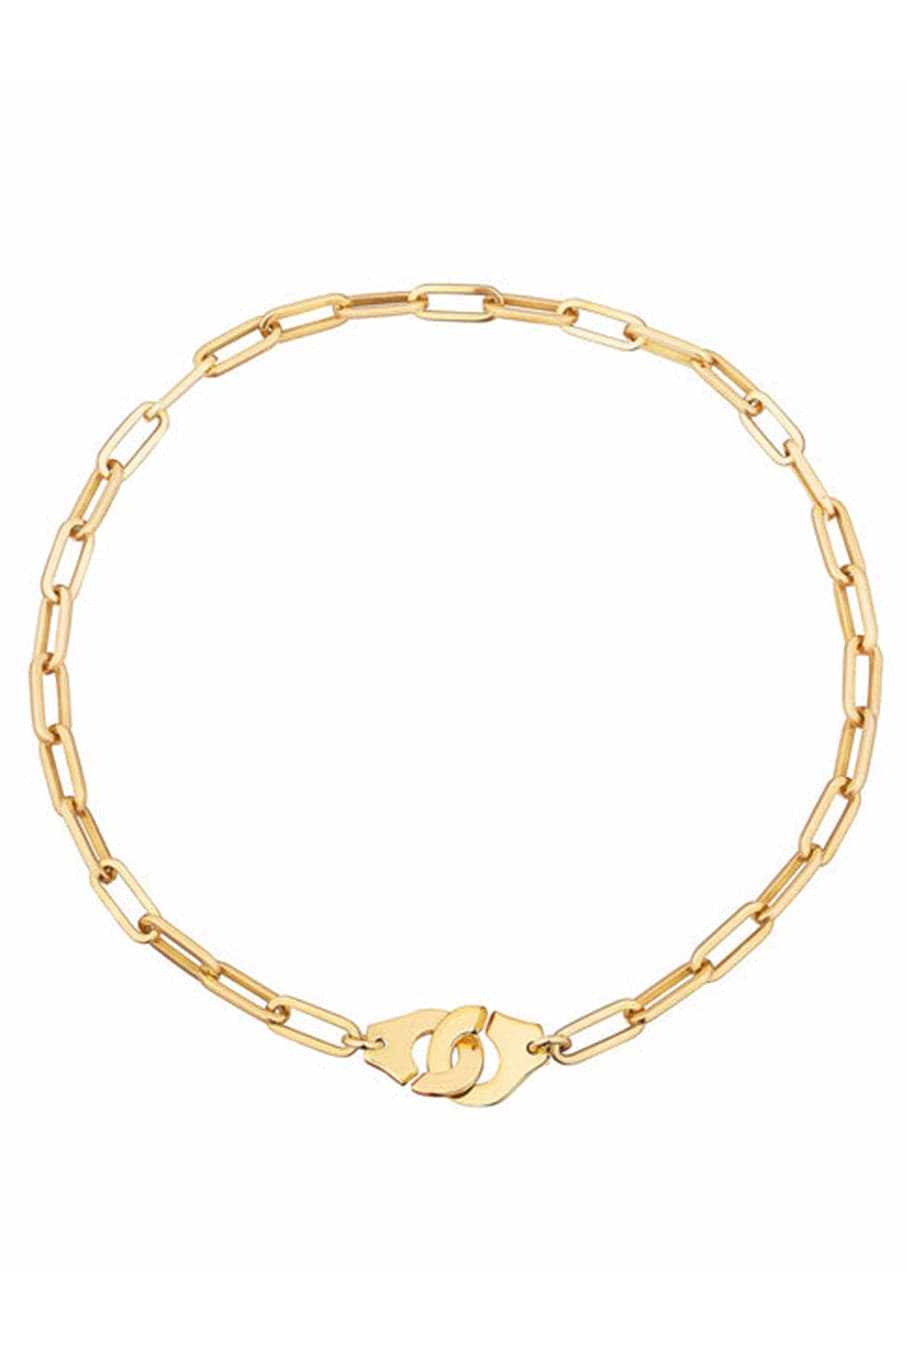 DINH VAN-Menottes R15 Chain Necklace - Yellow Gold-YELLOW GOLD